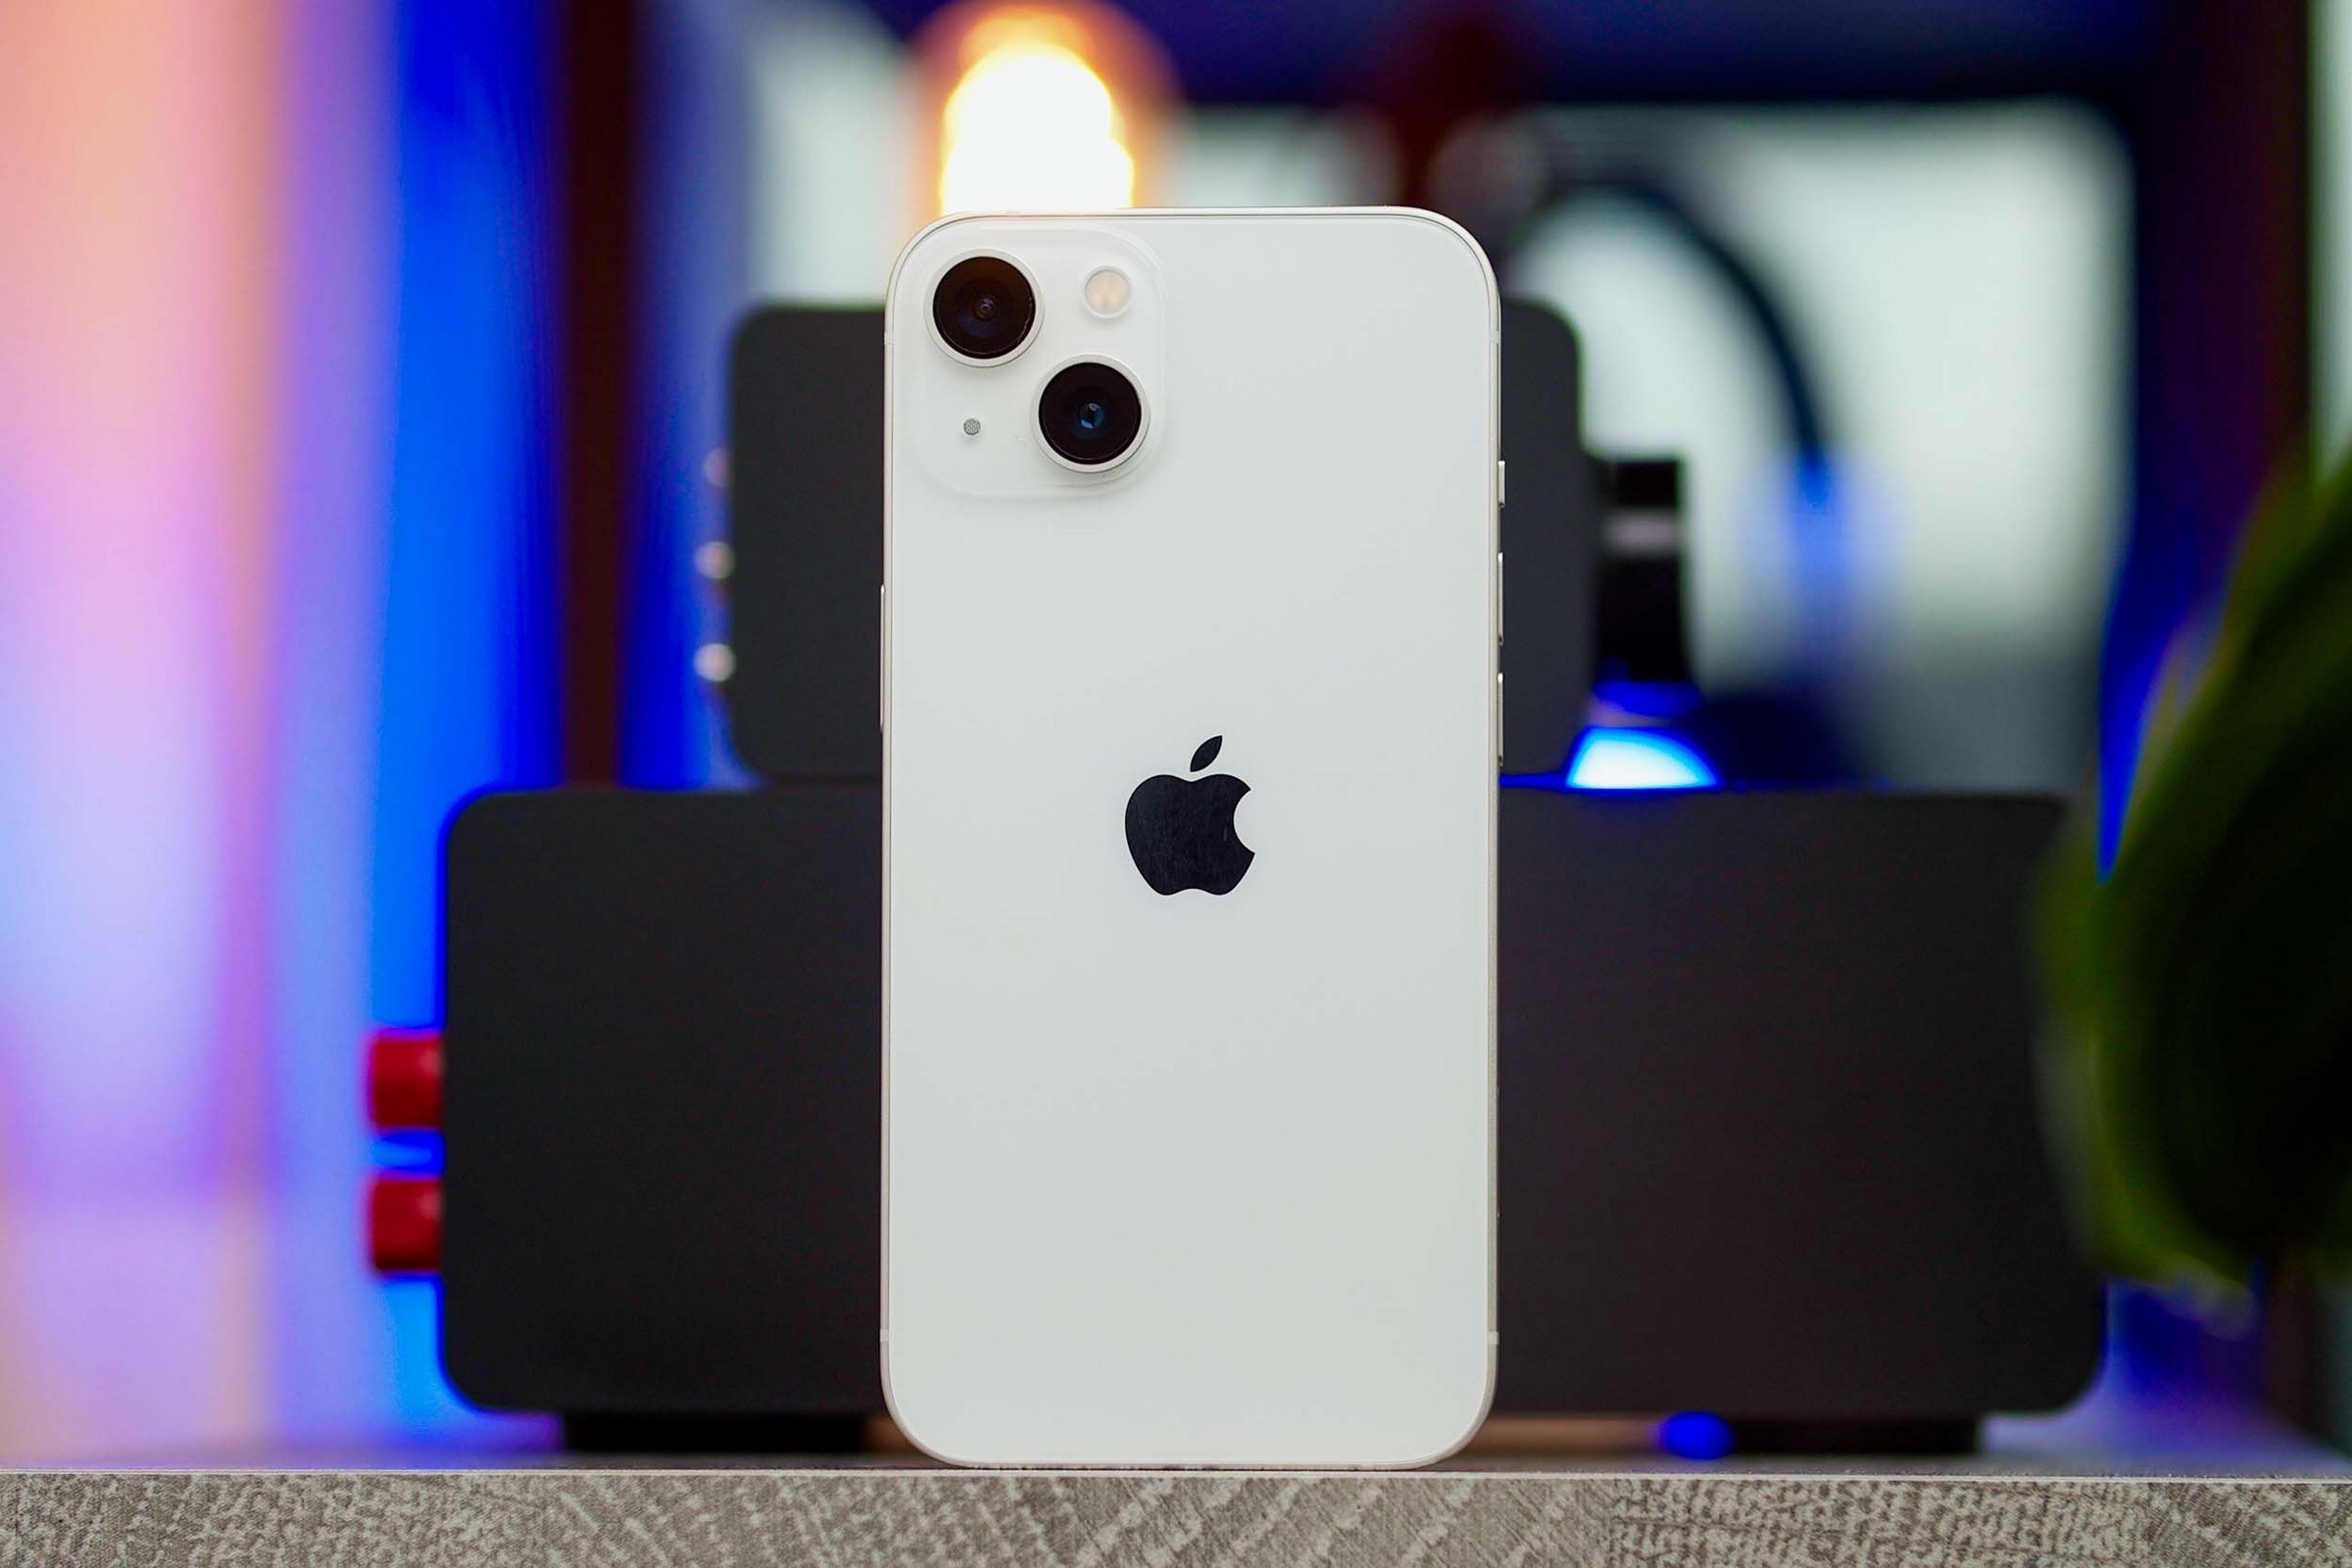  Best iPhone deals and sales for October 2022